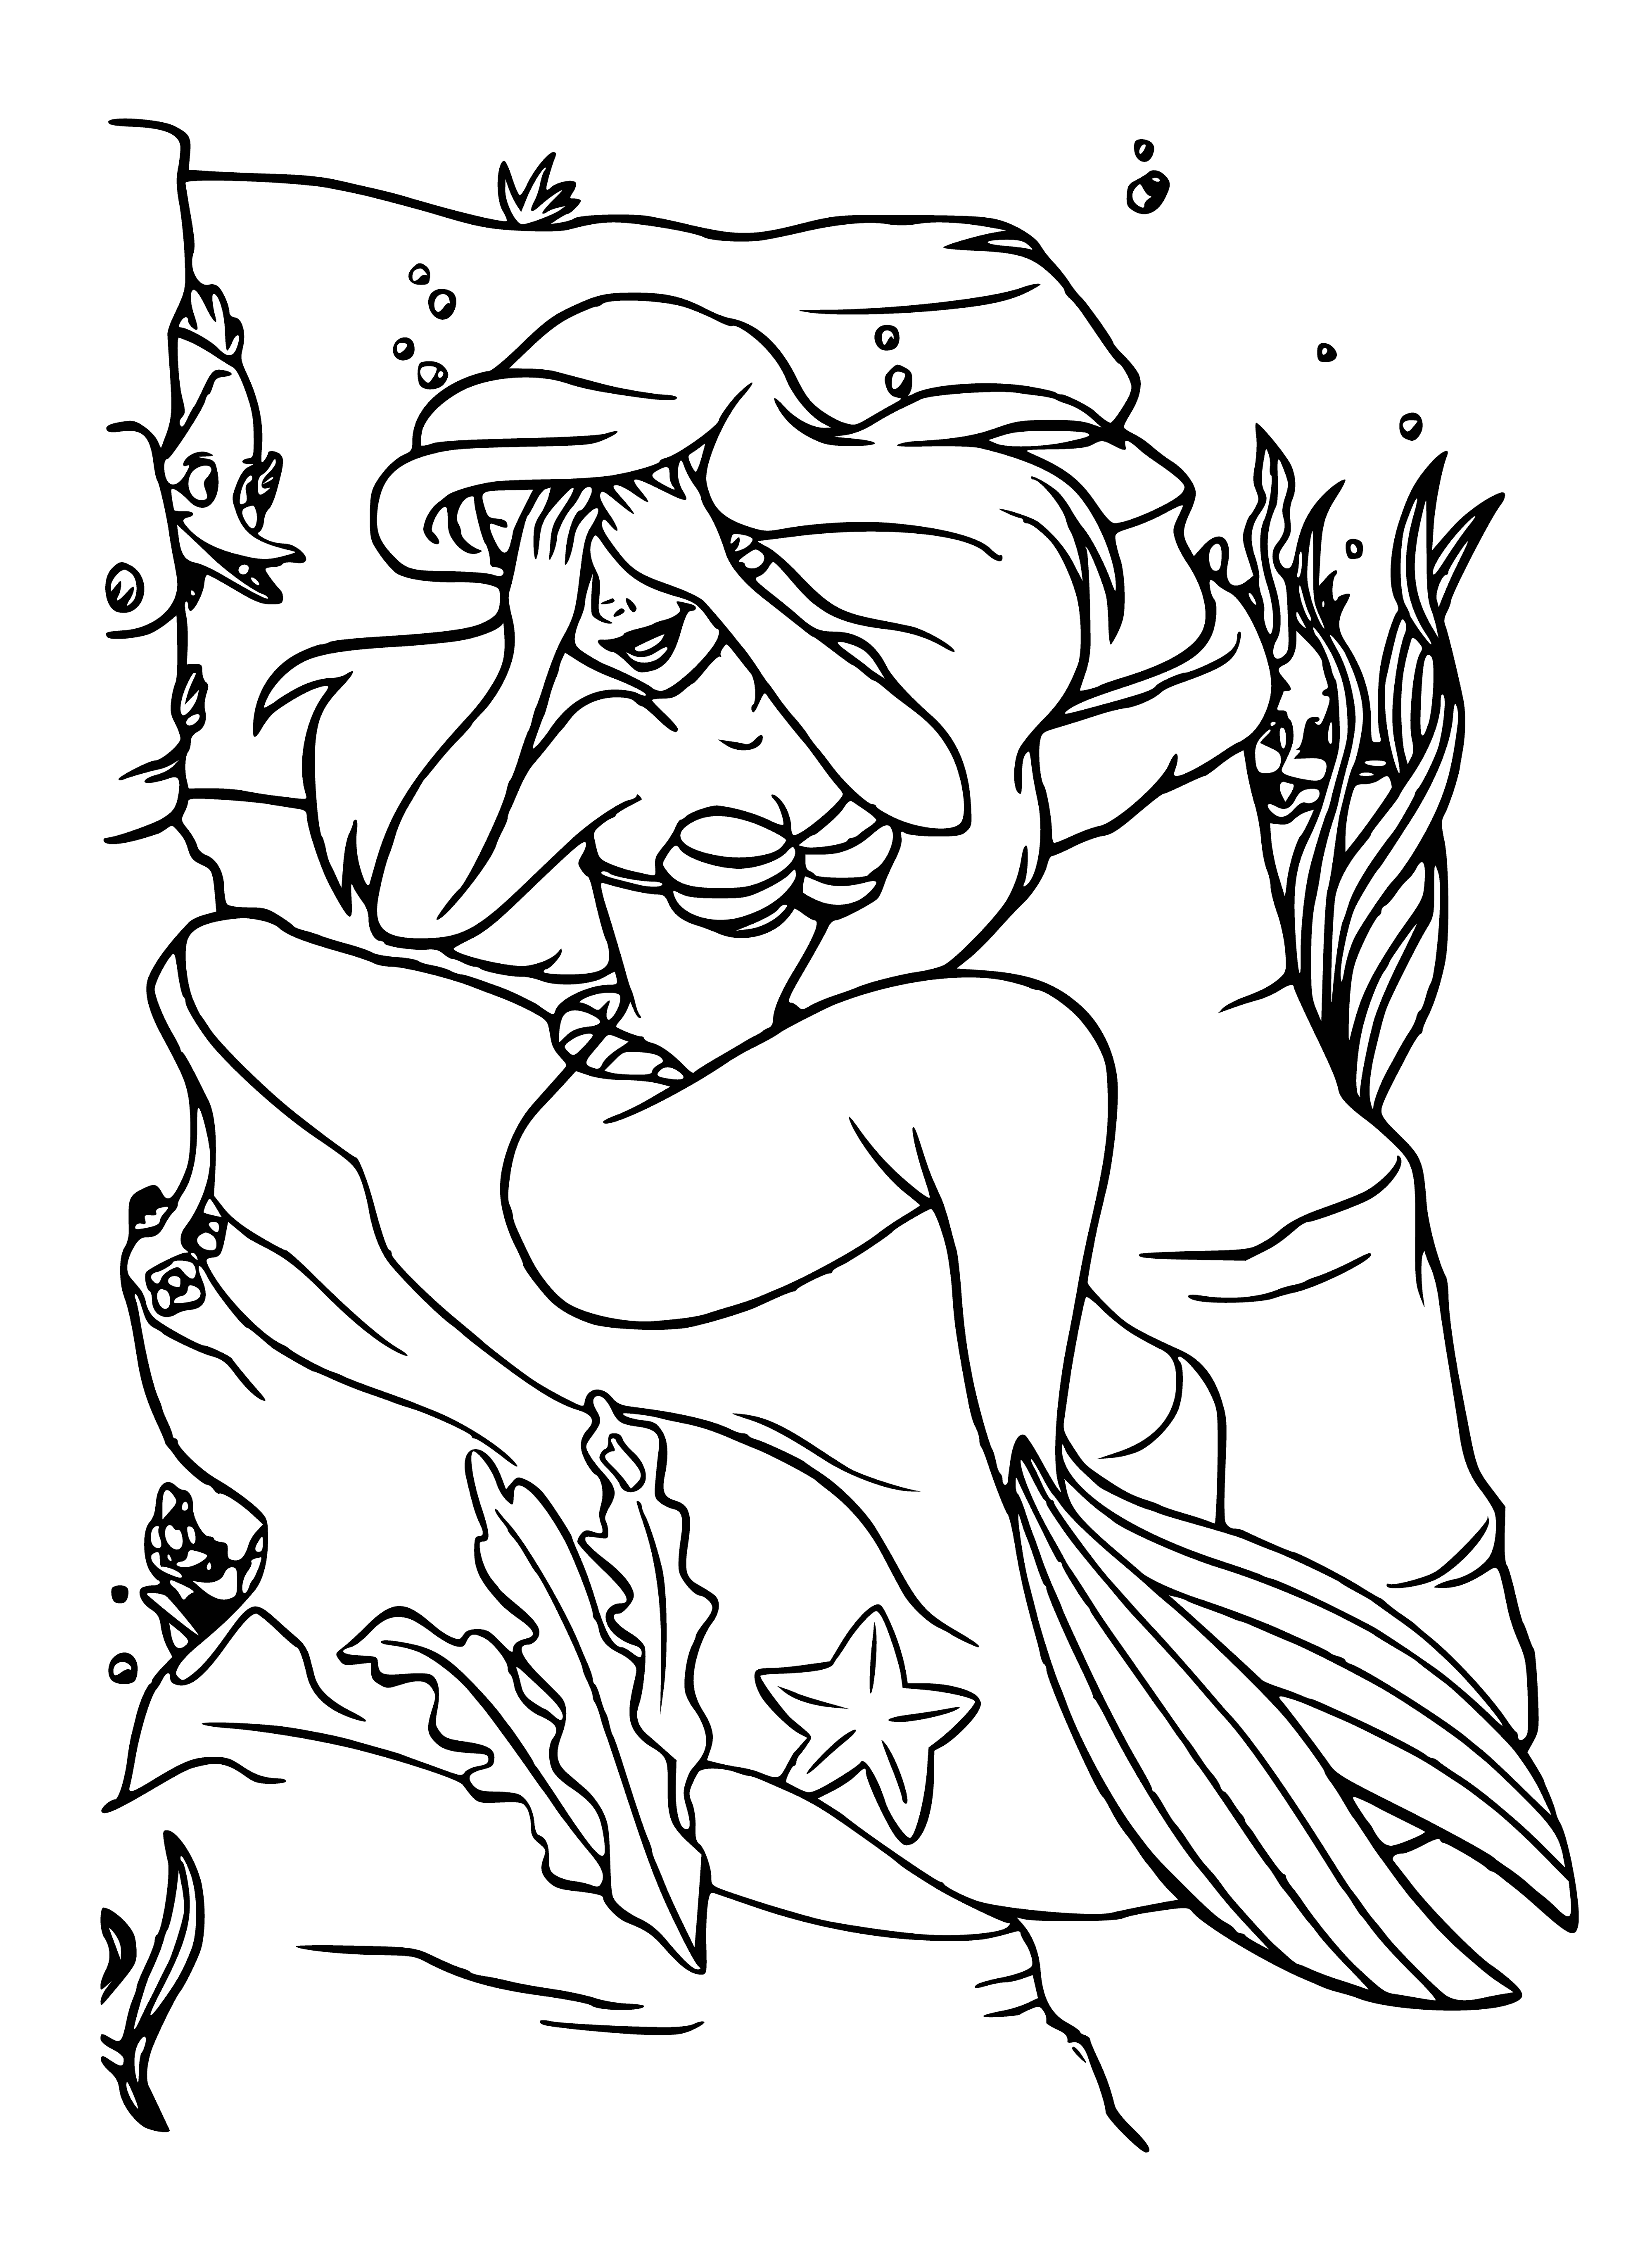 coloring page: A little mermaid plays peekaboo with a pink octopus. She wears a green seaweed skirt & purple seashell bra and has a blue fish tail.